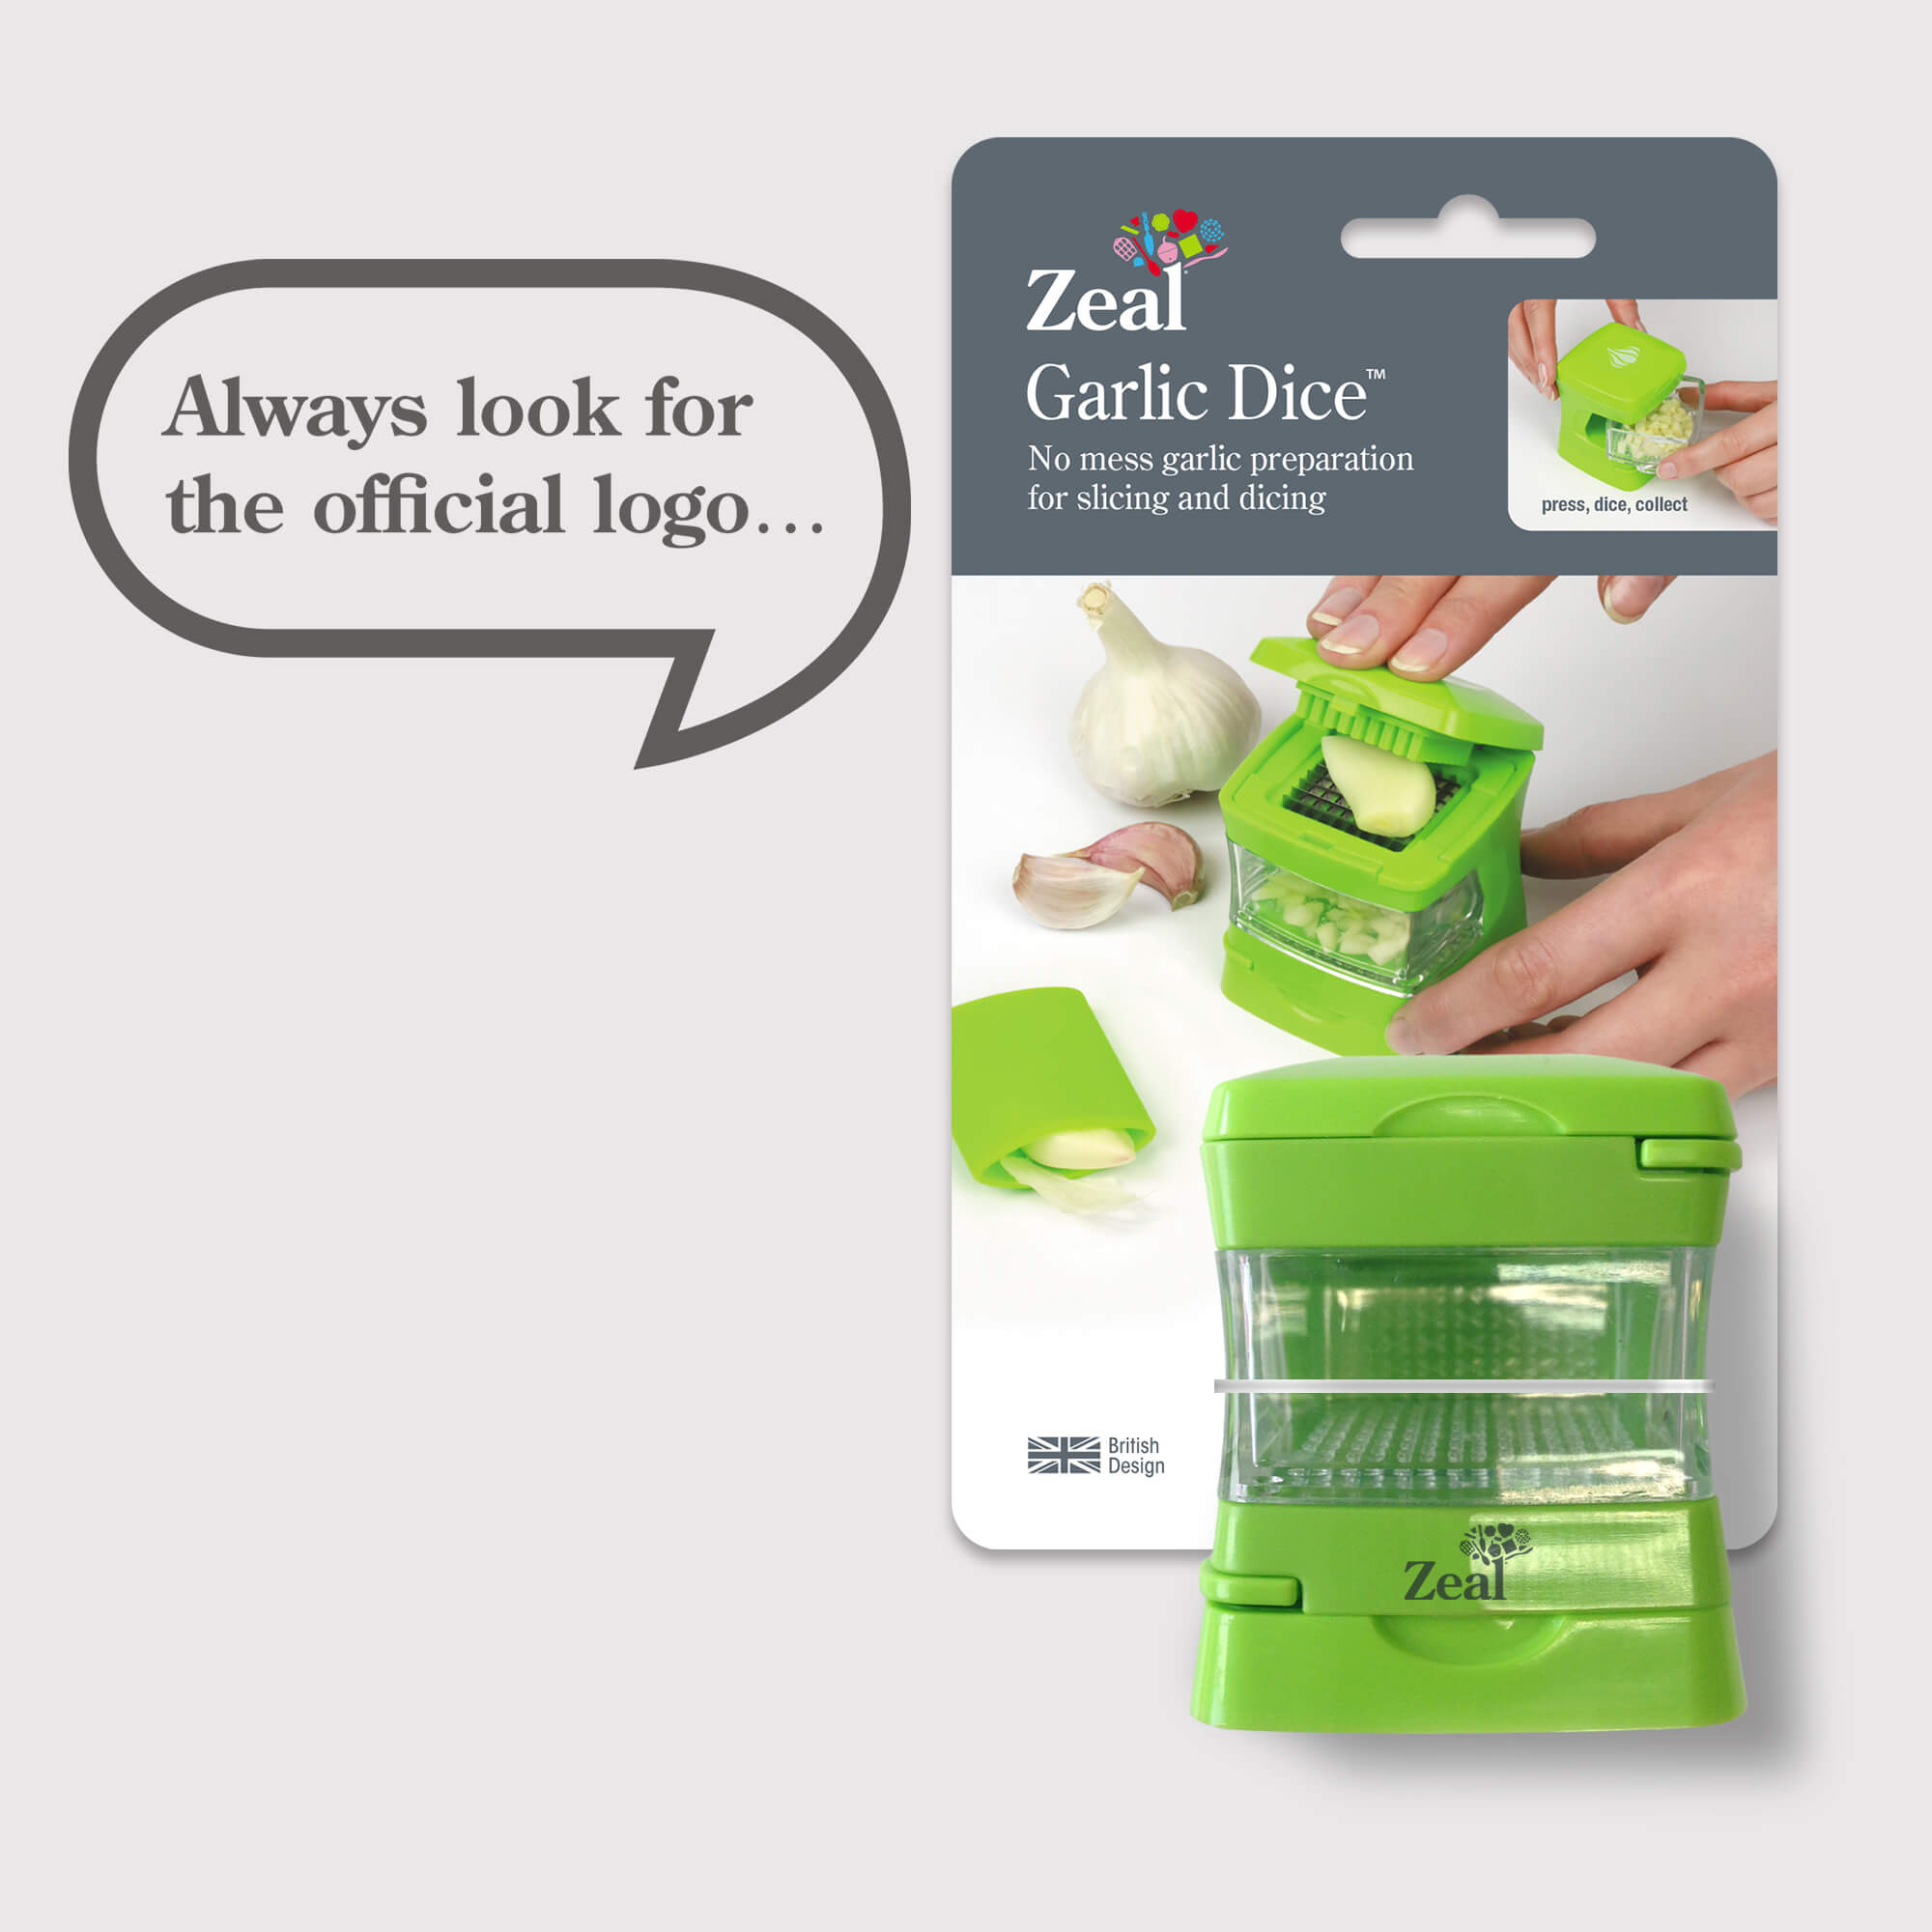 Zeal Garlic Dice with packaging